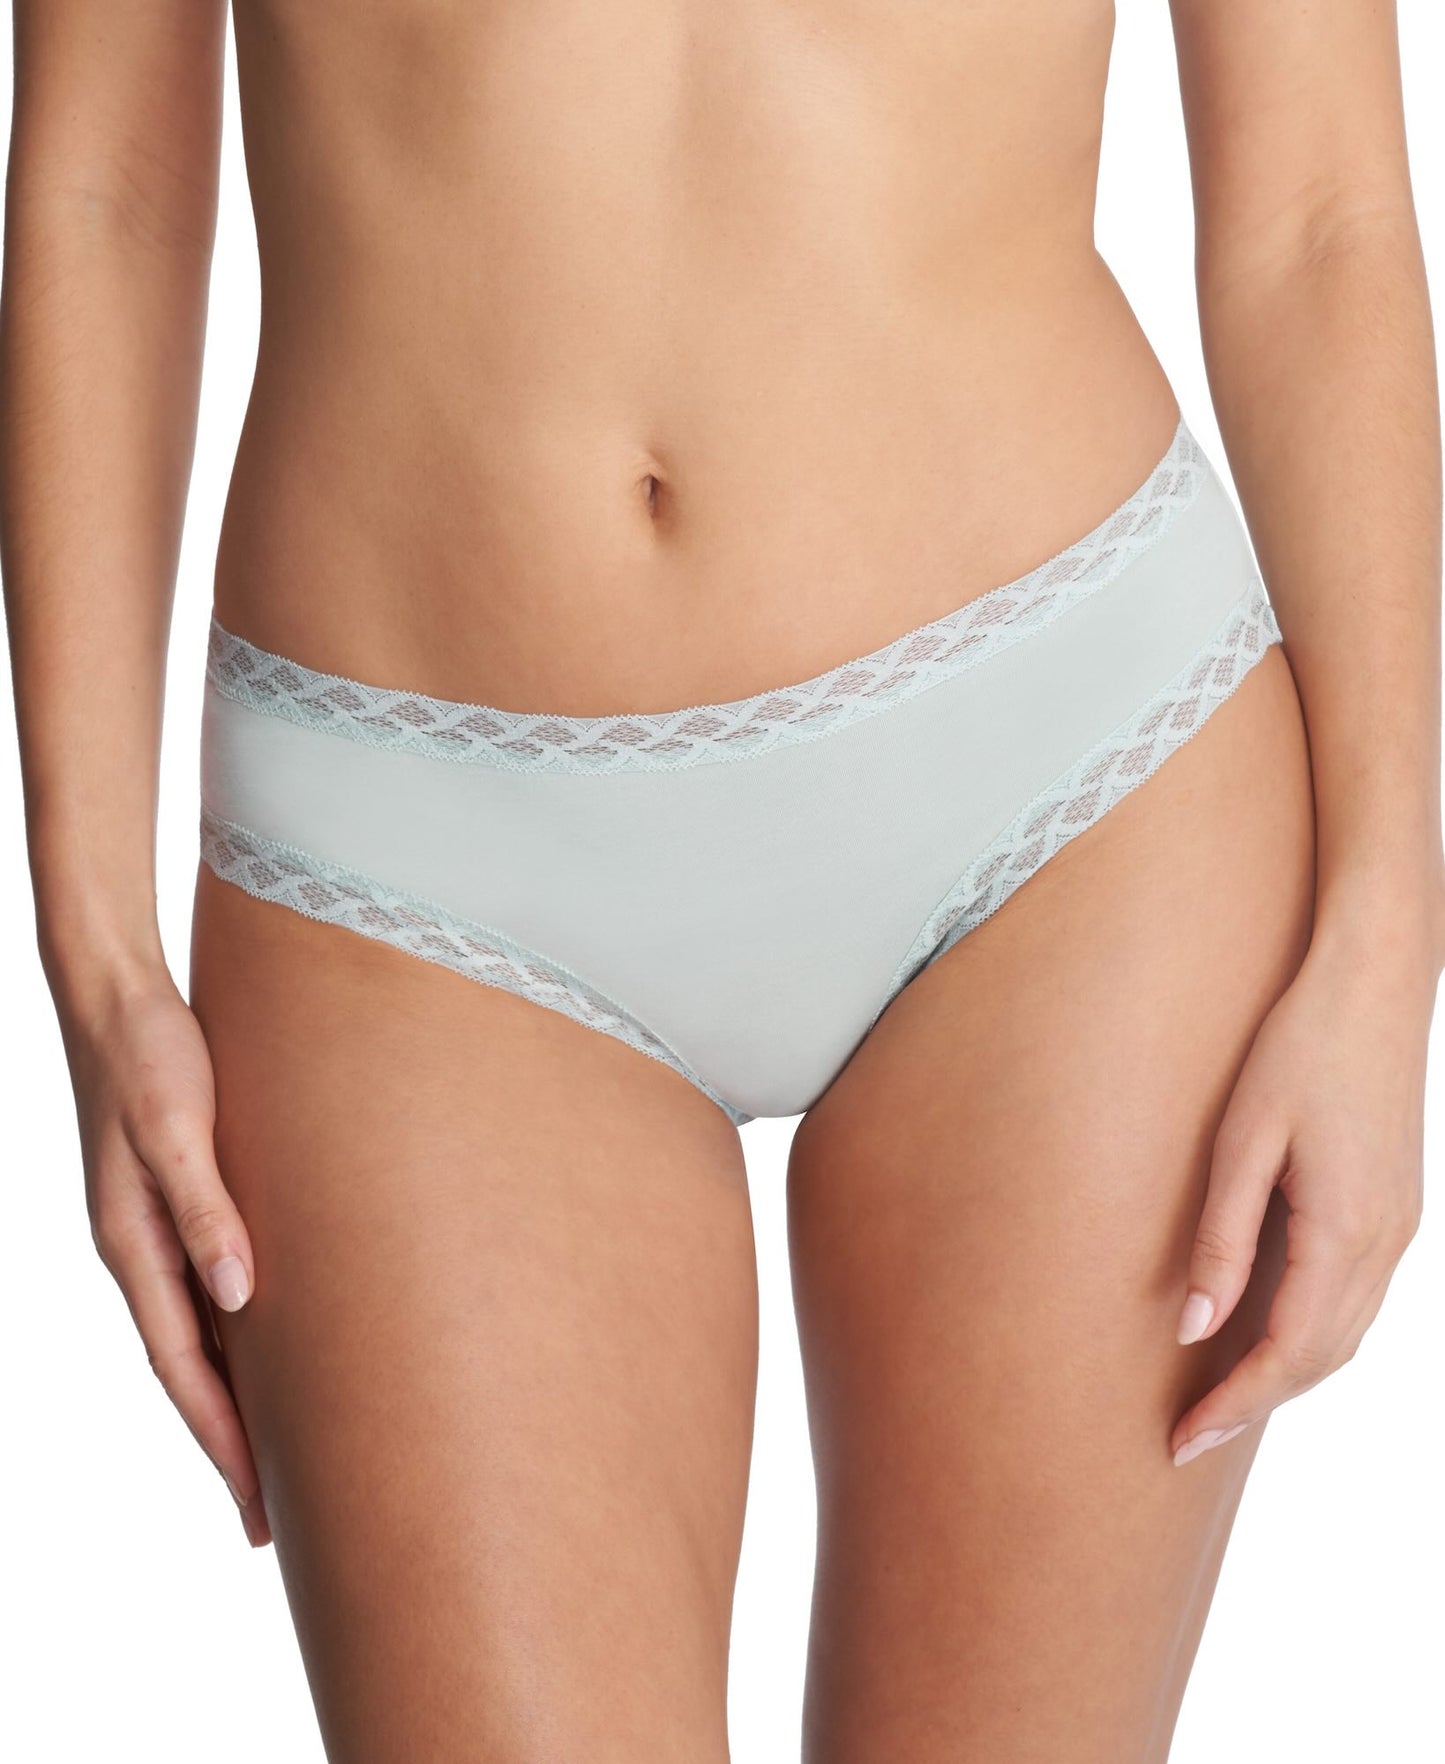 Bliss Girl brief - new summer colors